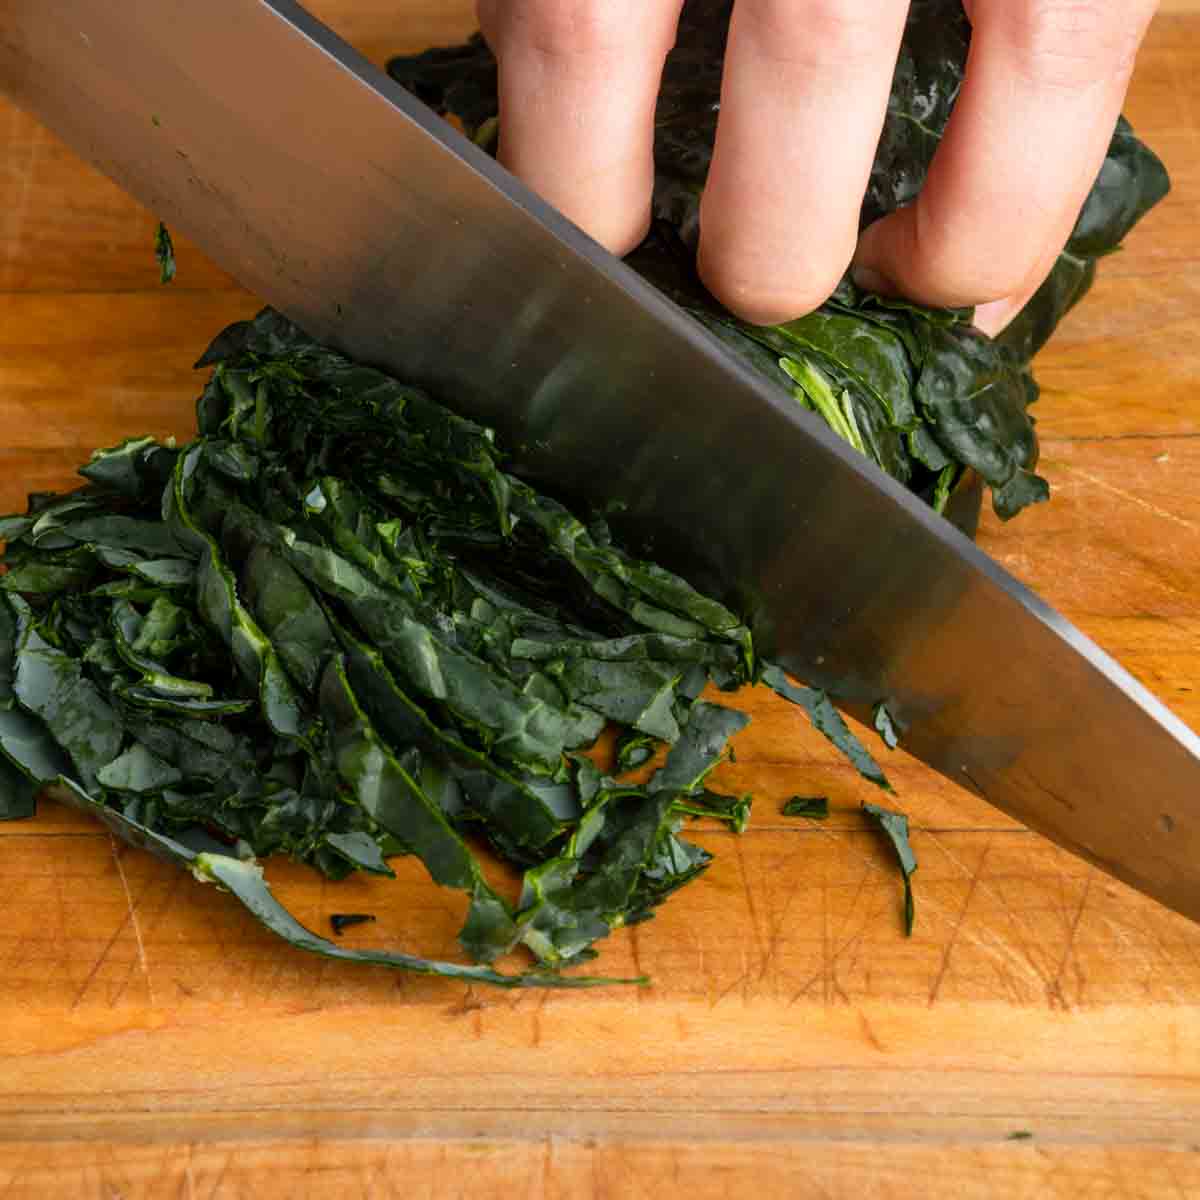 Thinly shaving the rolled kale leaves with a sharp knife.